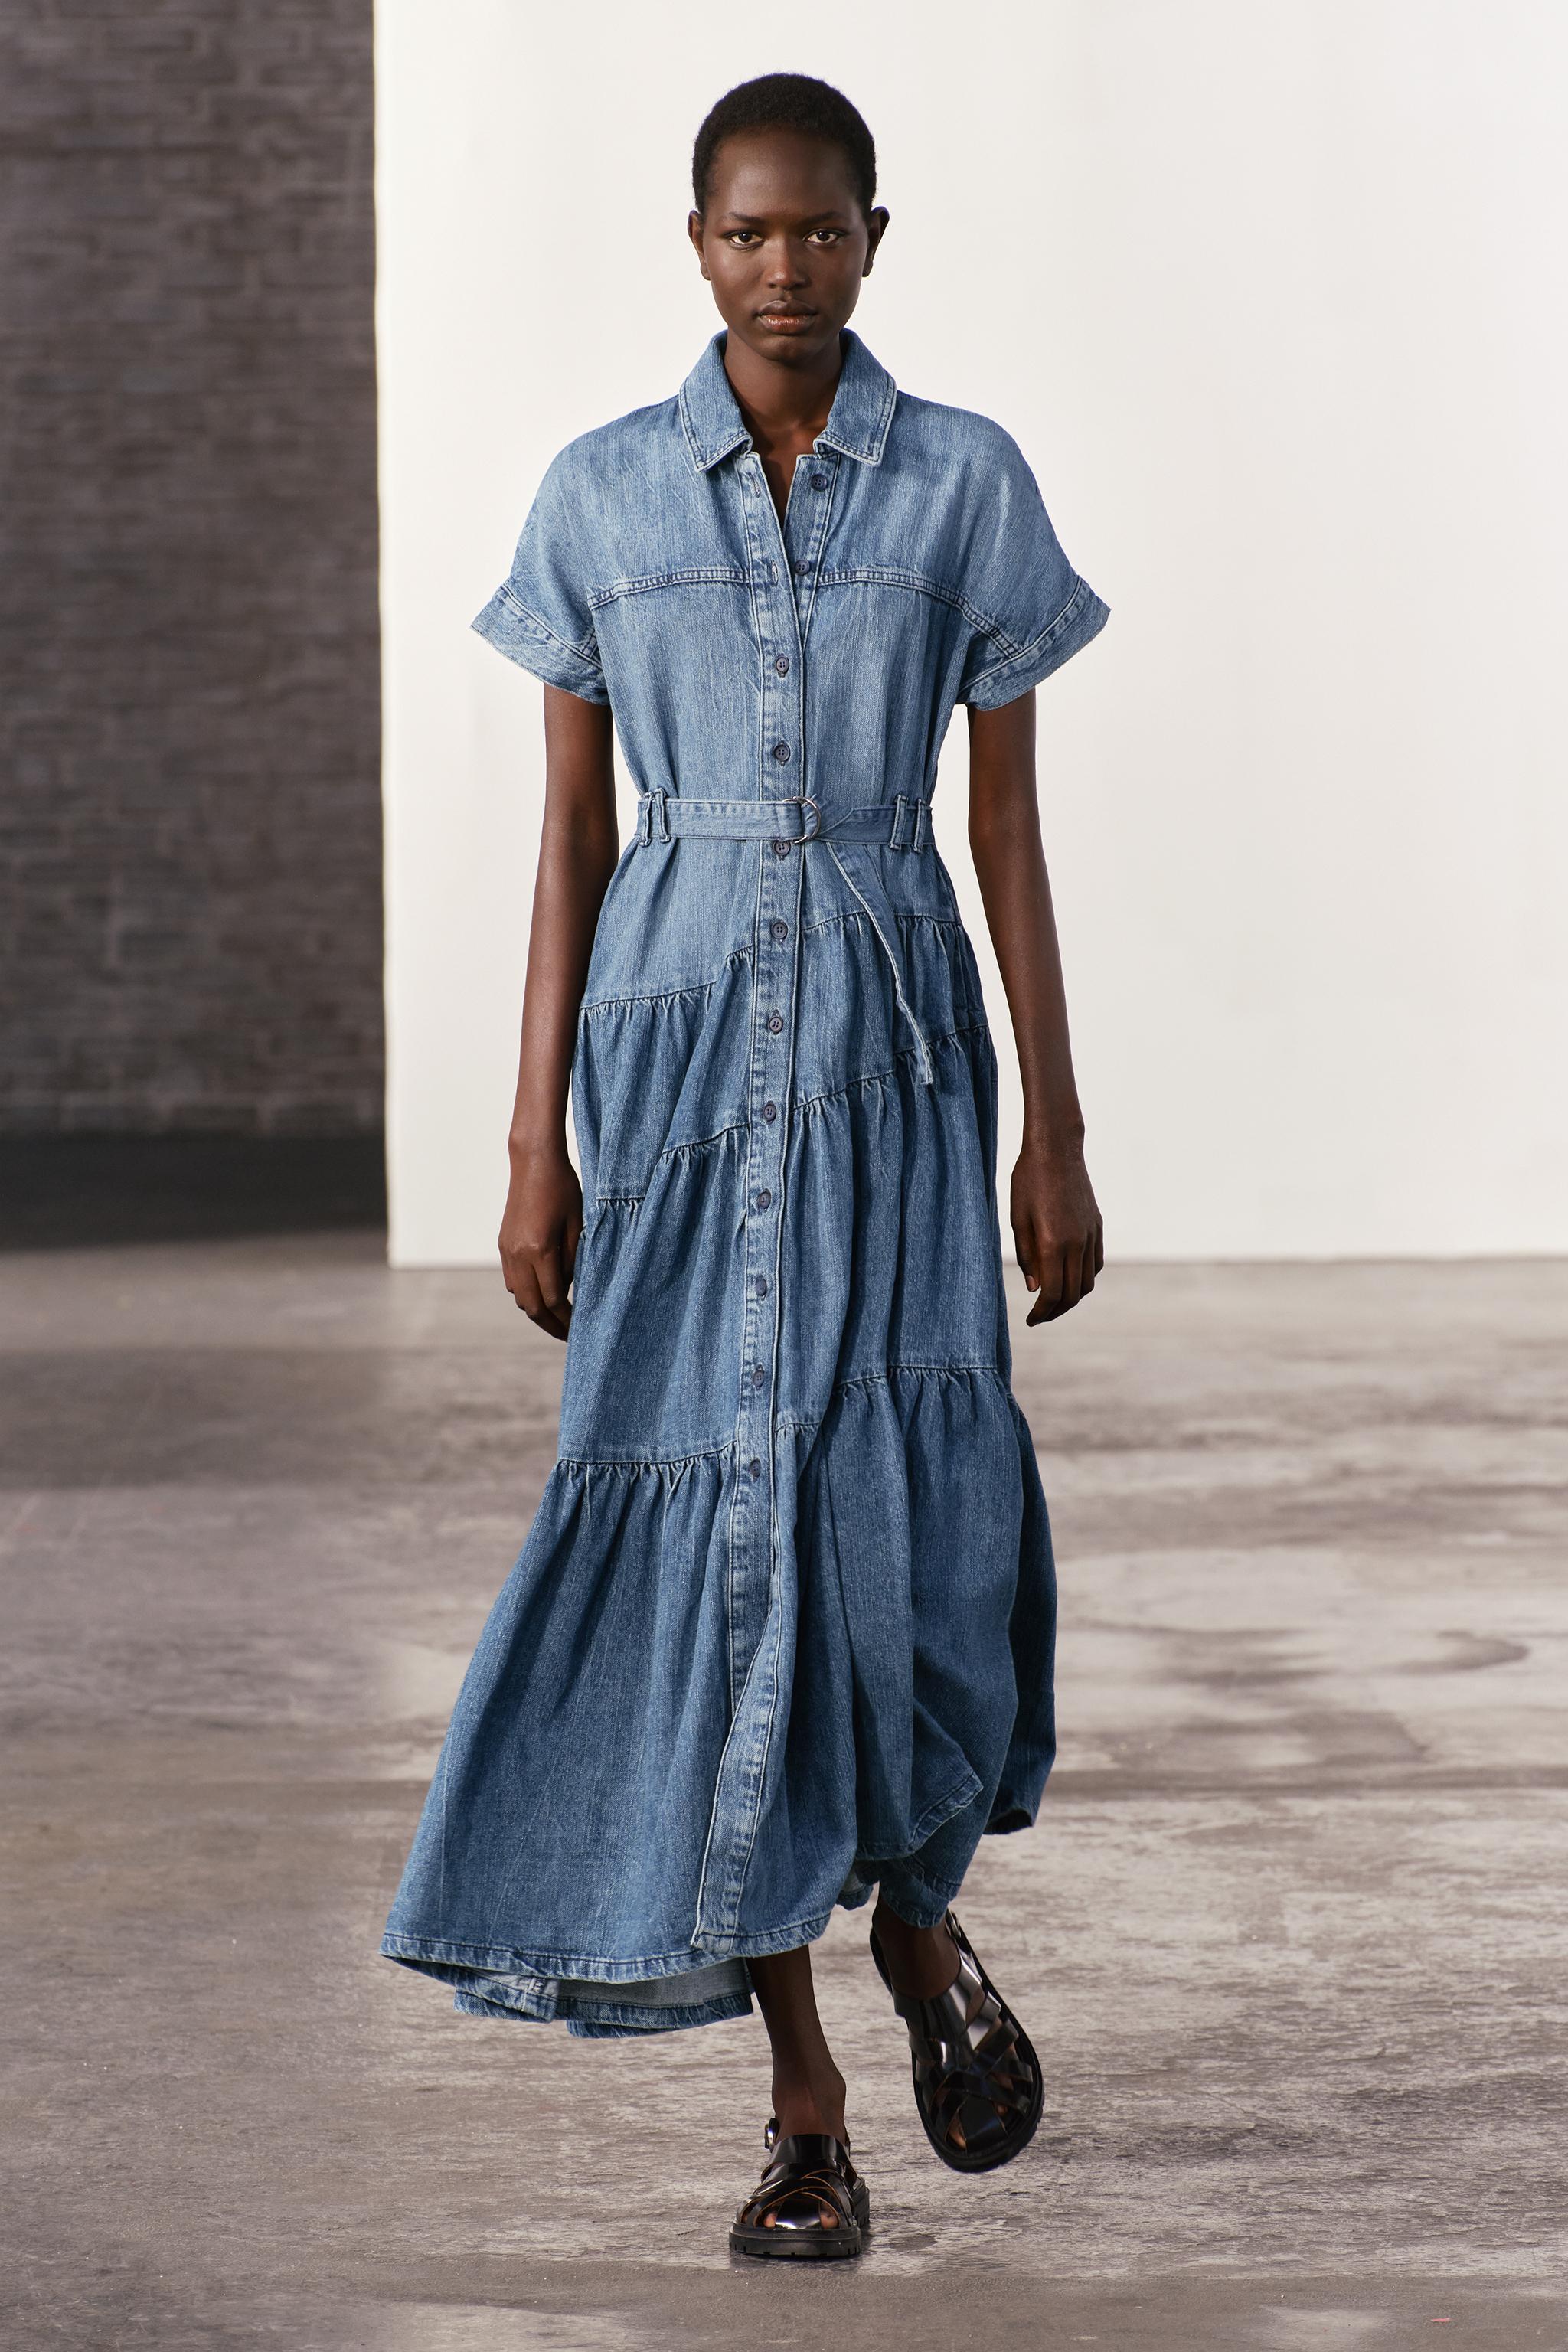 Korean Summer Womens Blue Jeans Denim Dress For Women With Side Button And  Suspender Midi Loose Fit, Available In Large Sizes Up To 5XL From  Sunshineavenue36518, $23.53